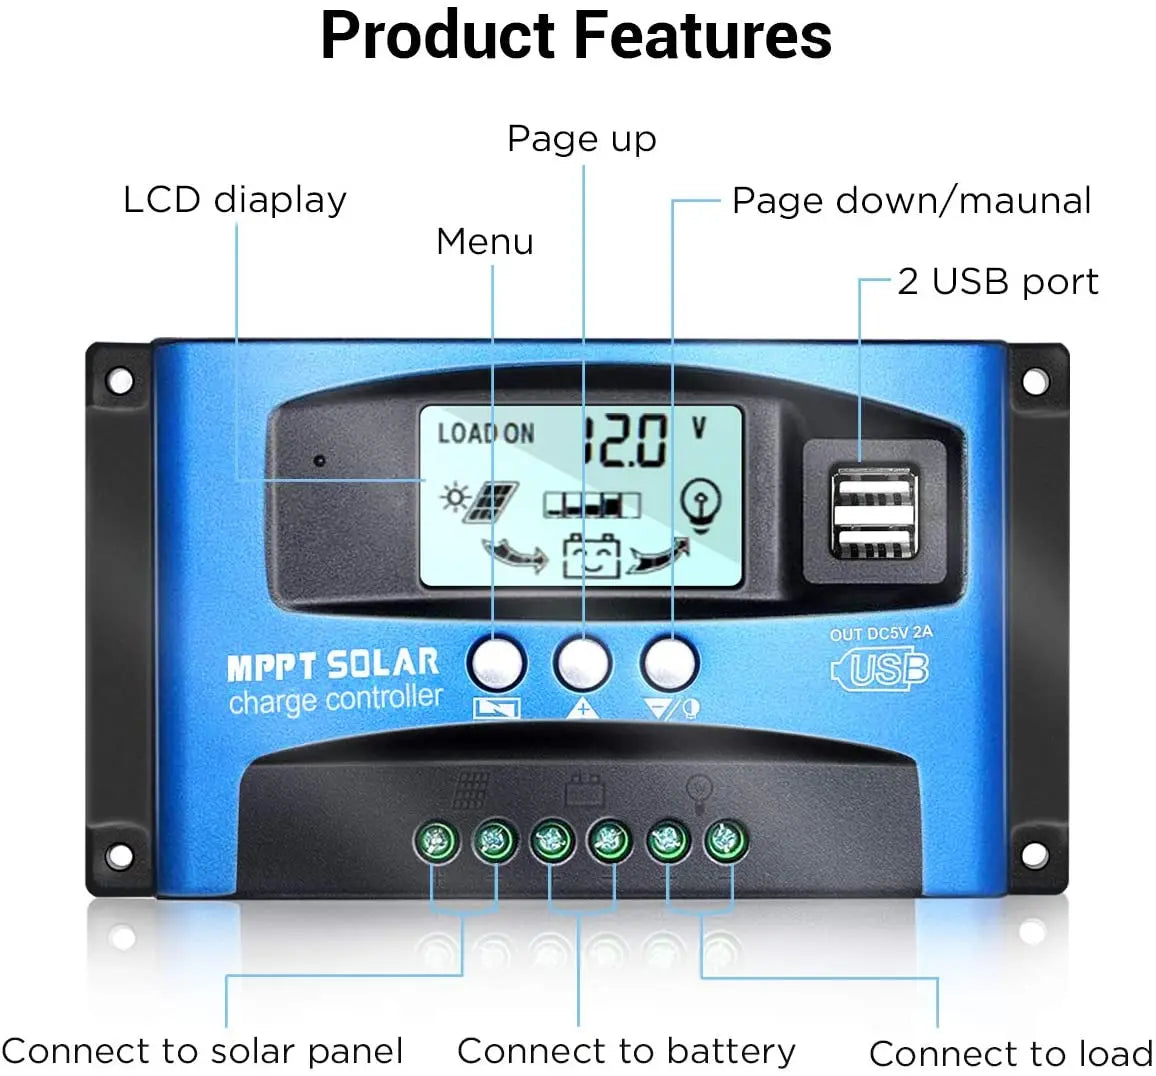 10A-100A MPPT Solar Controller, MPPT Solar Charger Controller with LCD display, navigation, USB ports, and 28V output for solar panels, batteries, and loads.